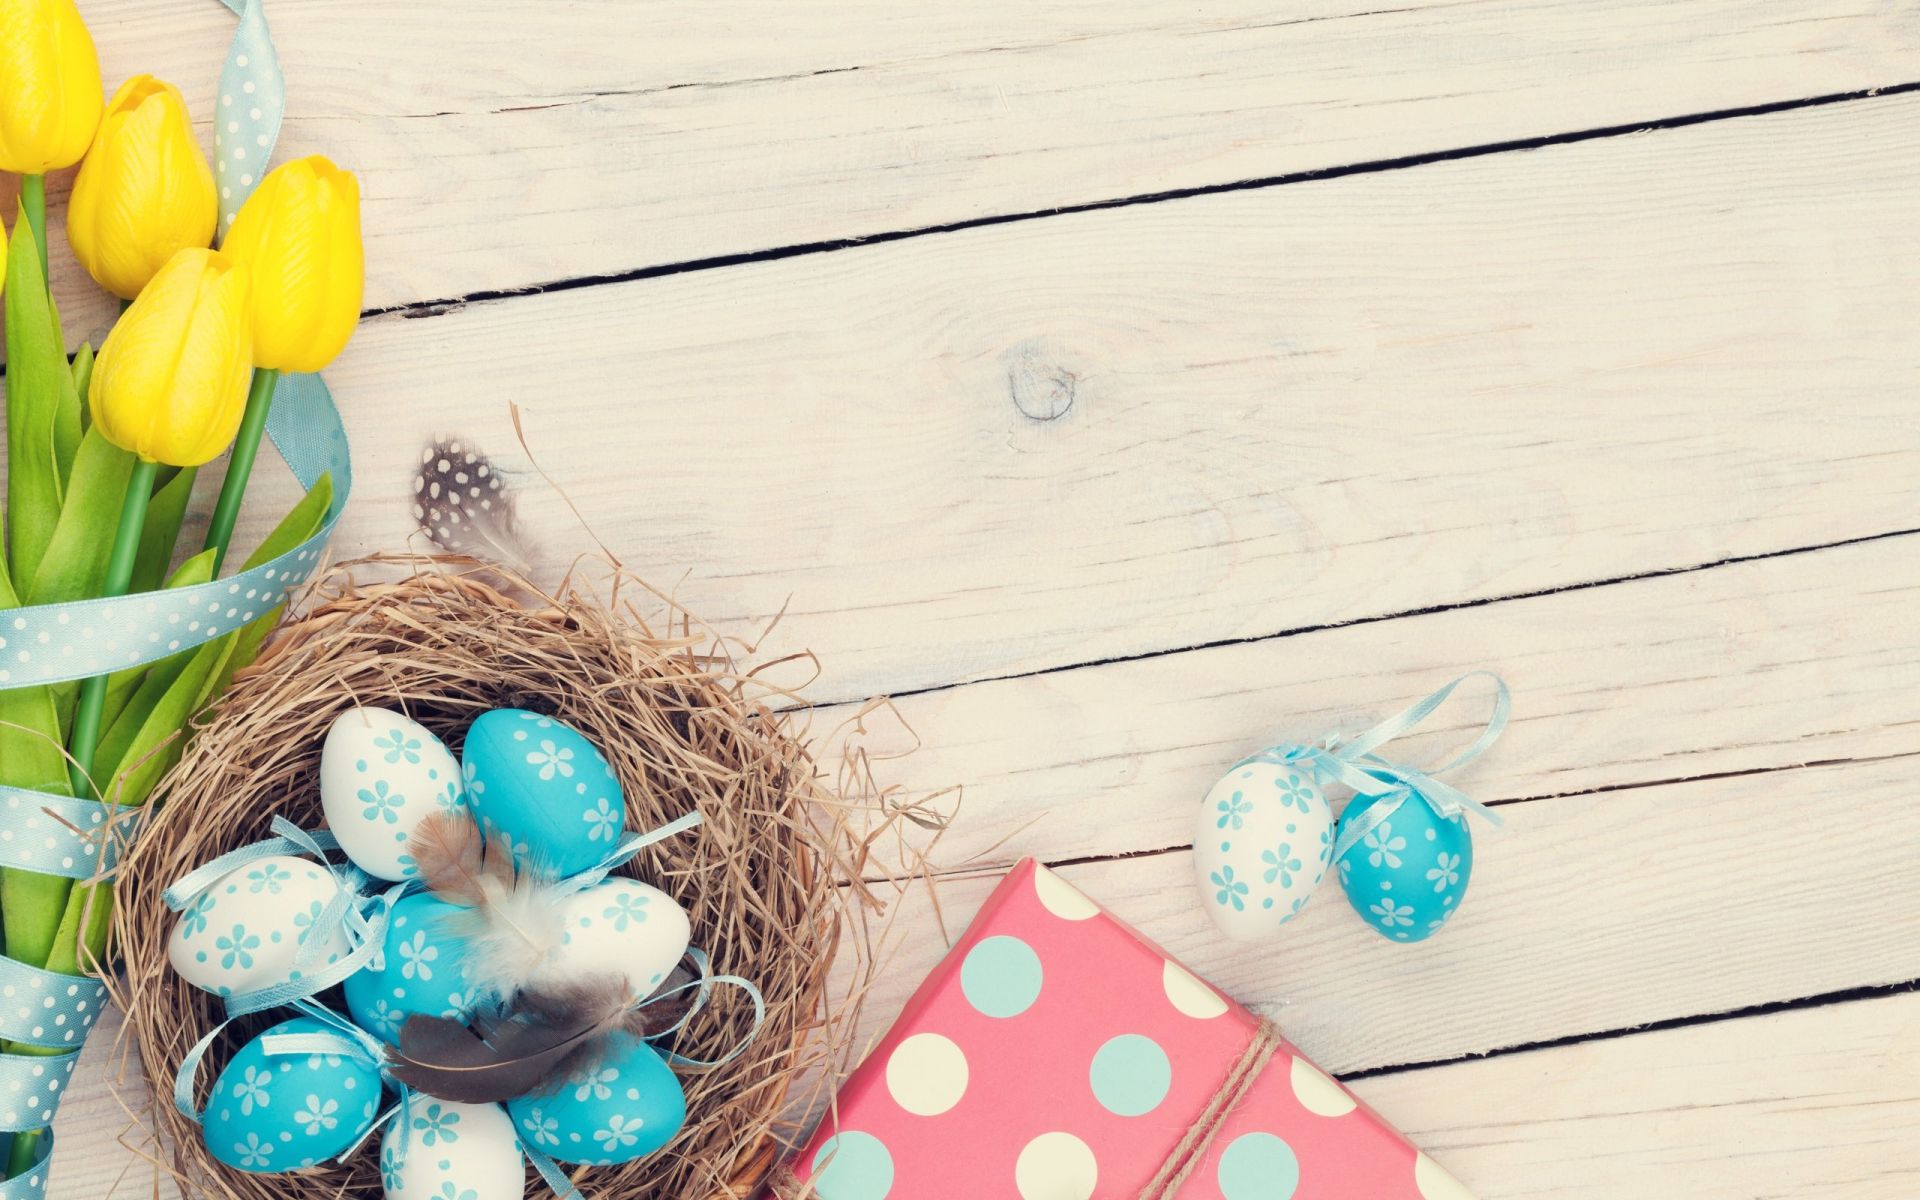 Easter Backgrounds download free